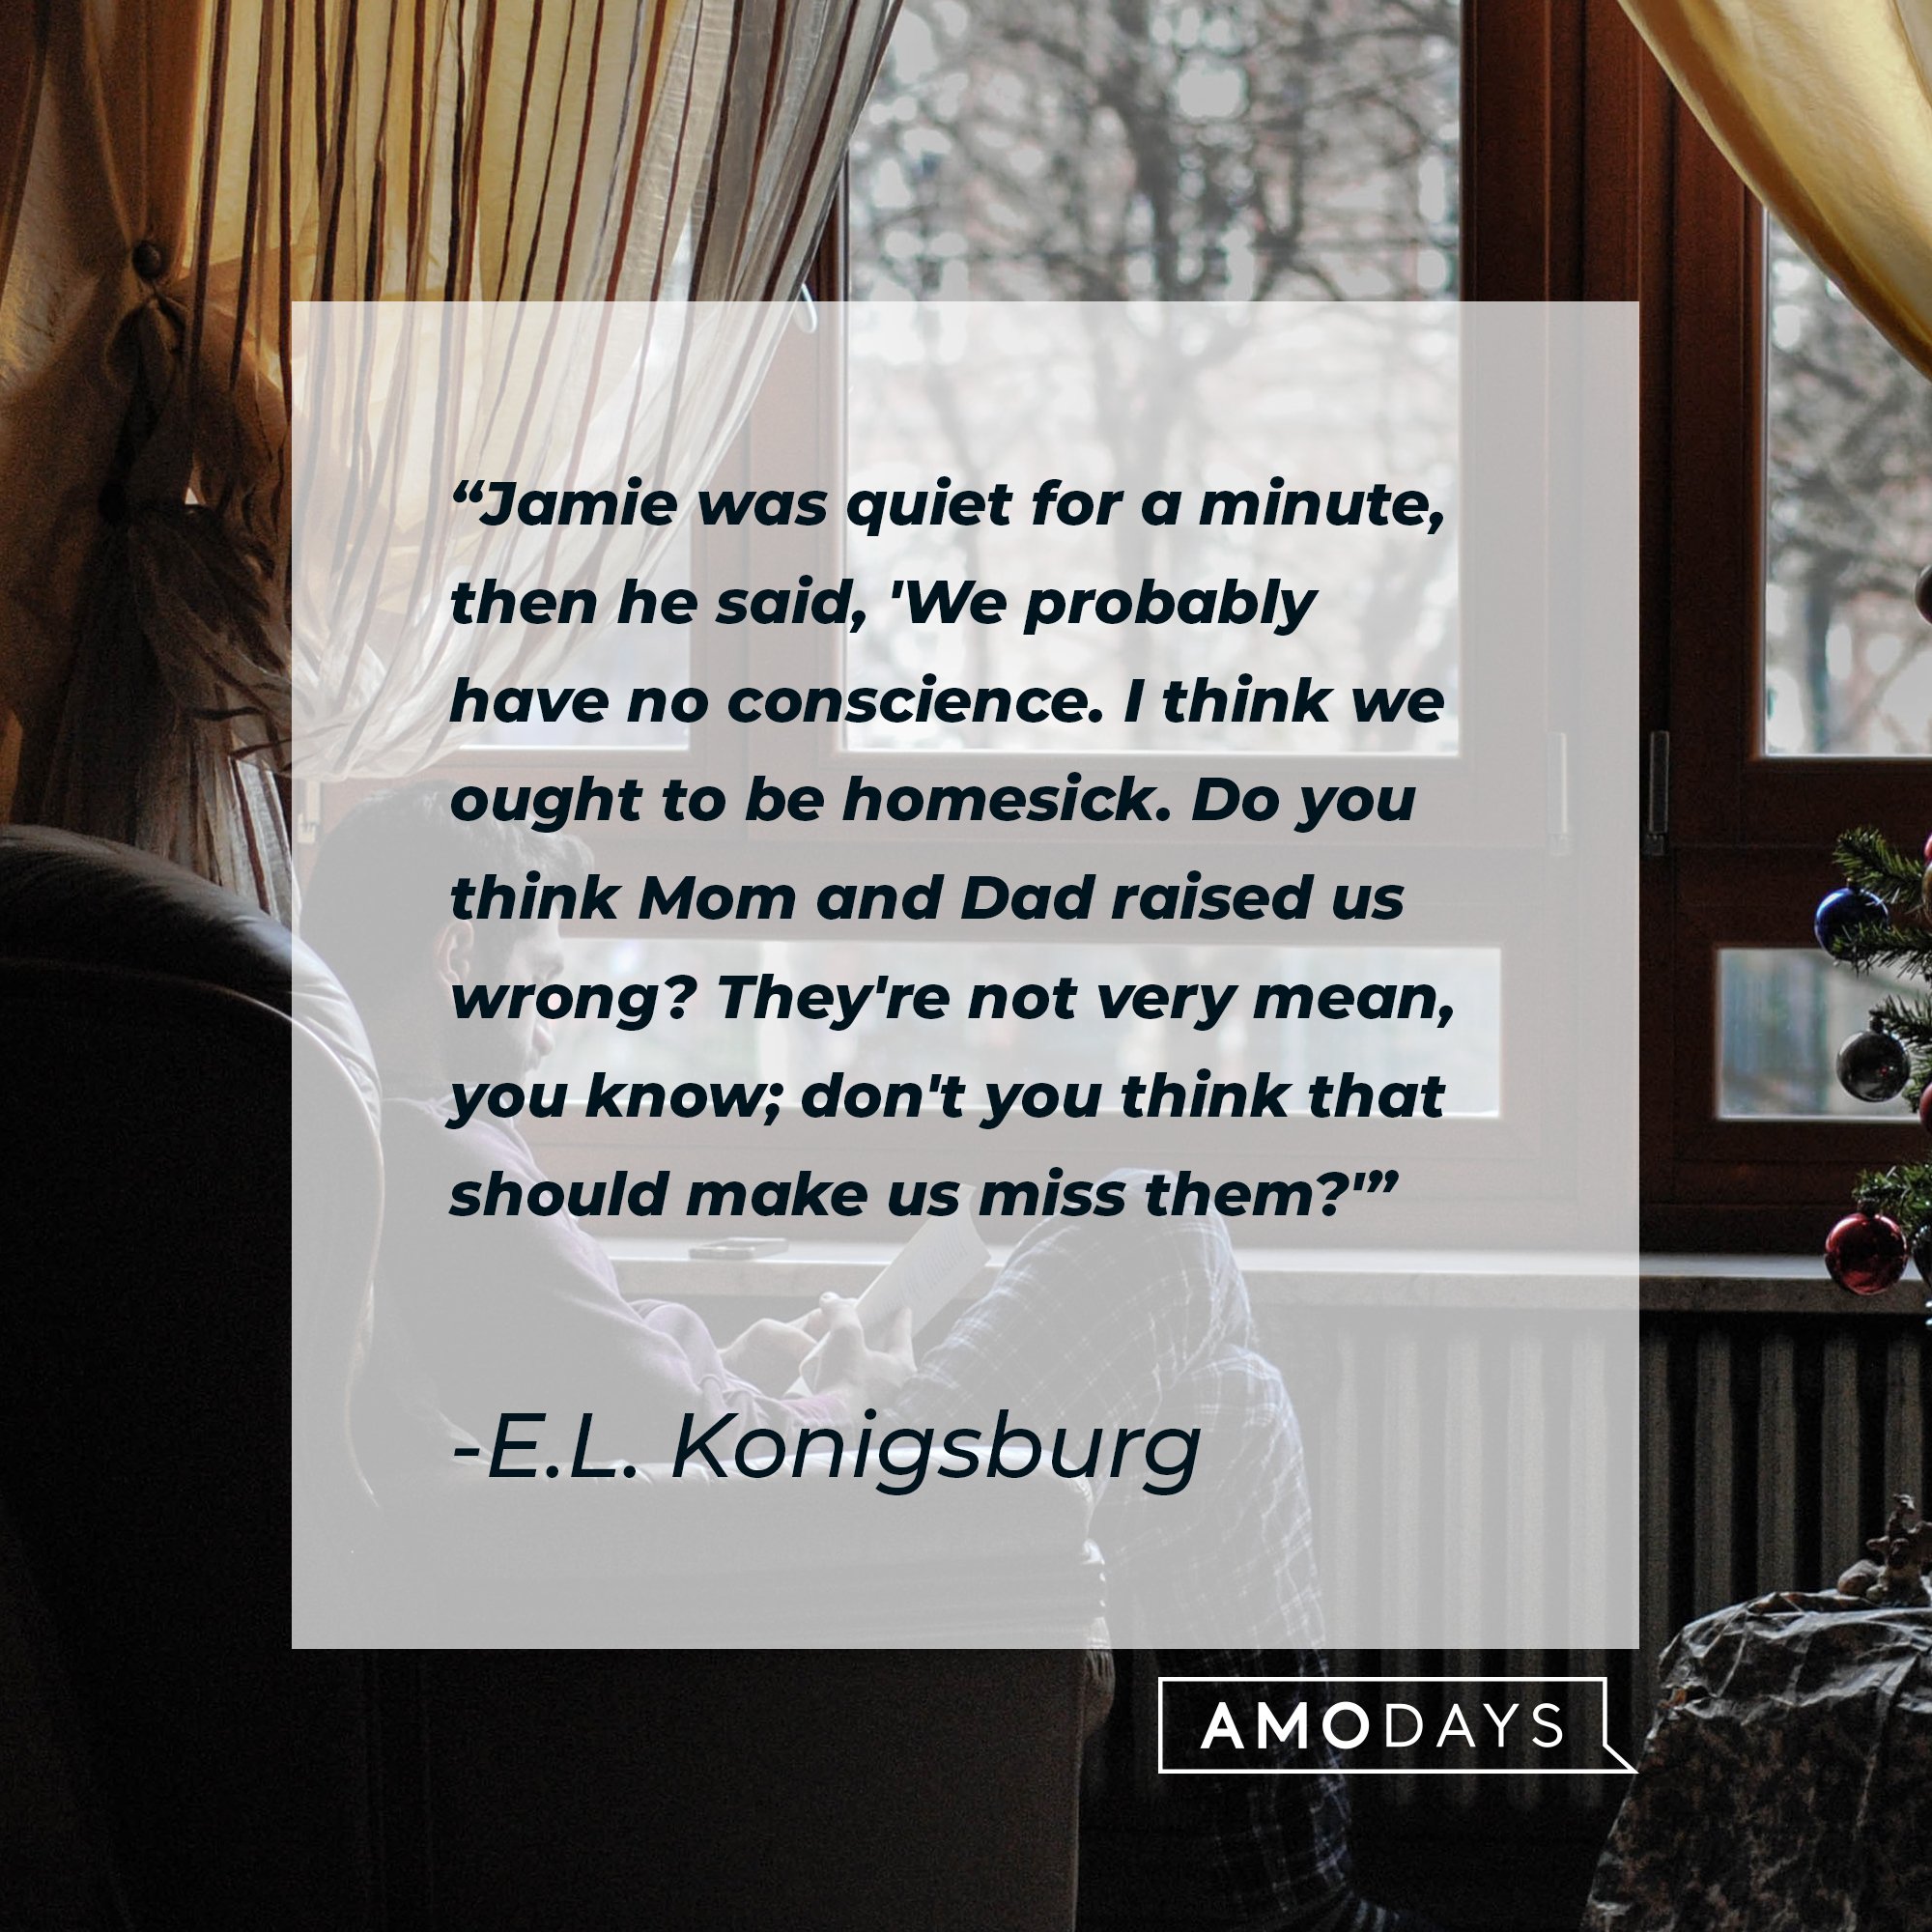 E.L. Konigsburg's quote: "Jamie was quiet for a minute, then he said, 'We probably have no conscience. I think we ought to be homesick. Do you think Mom and Dad raised us wrong? They're not very mean, you know; don't you think that should make us miss them?'" | Image: AmoDays